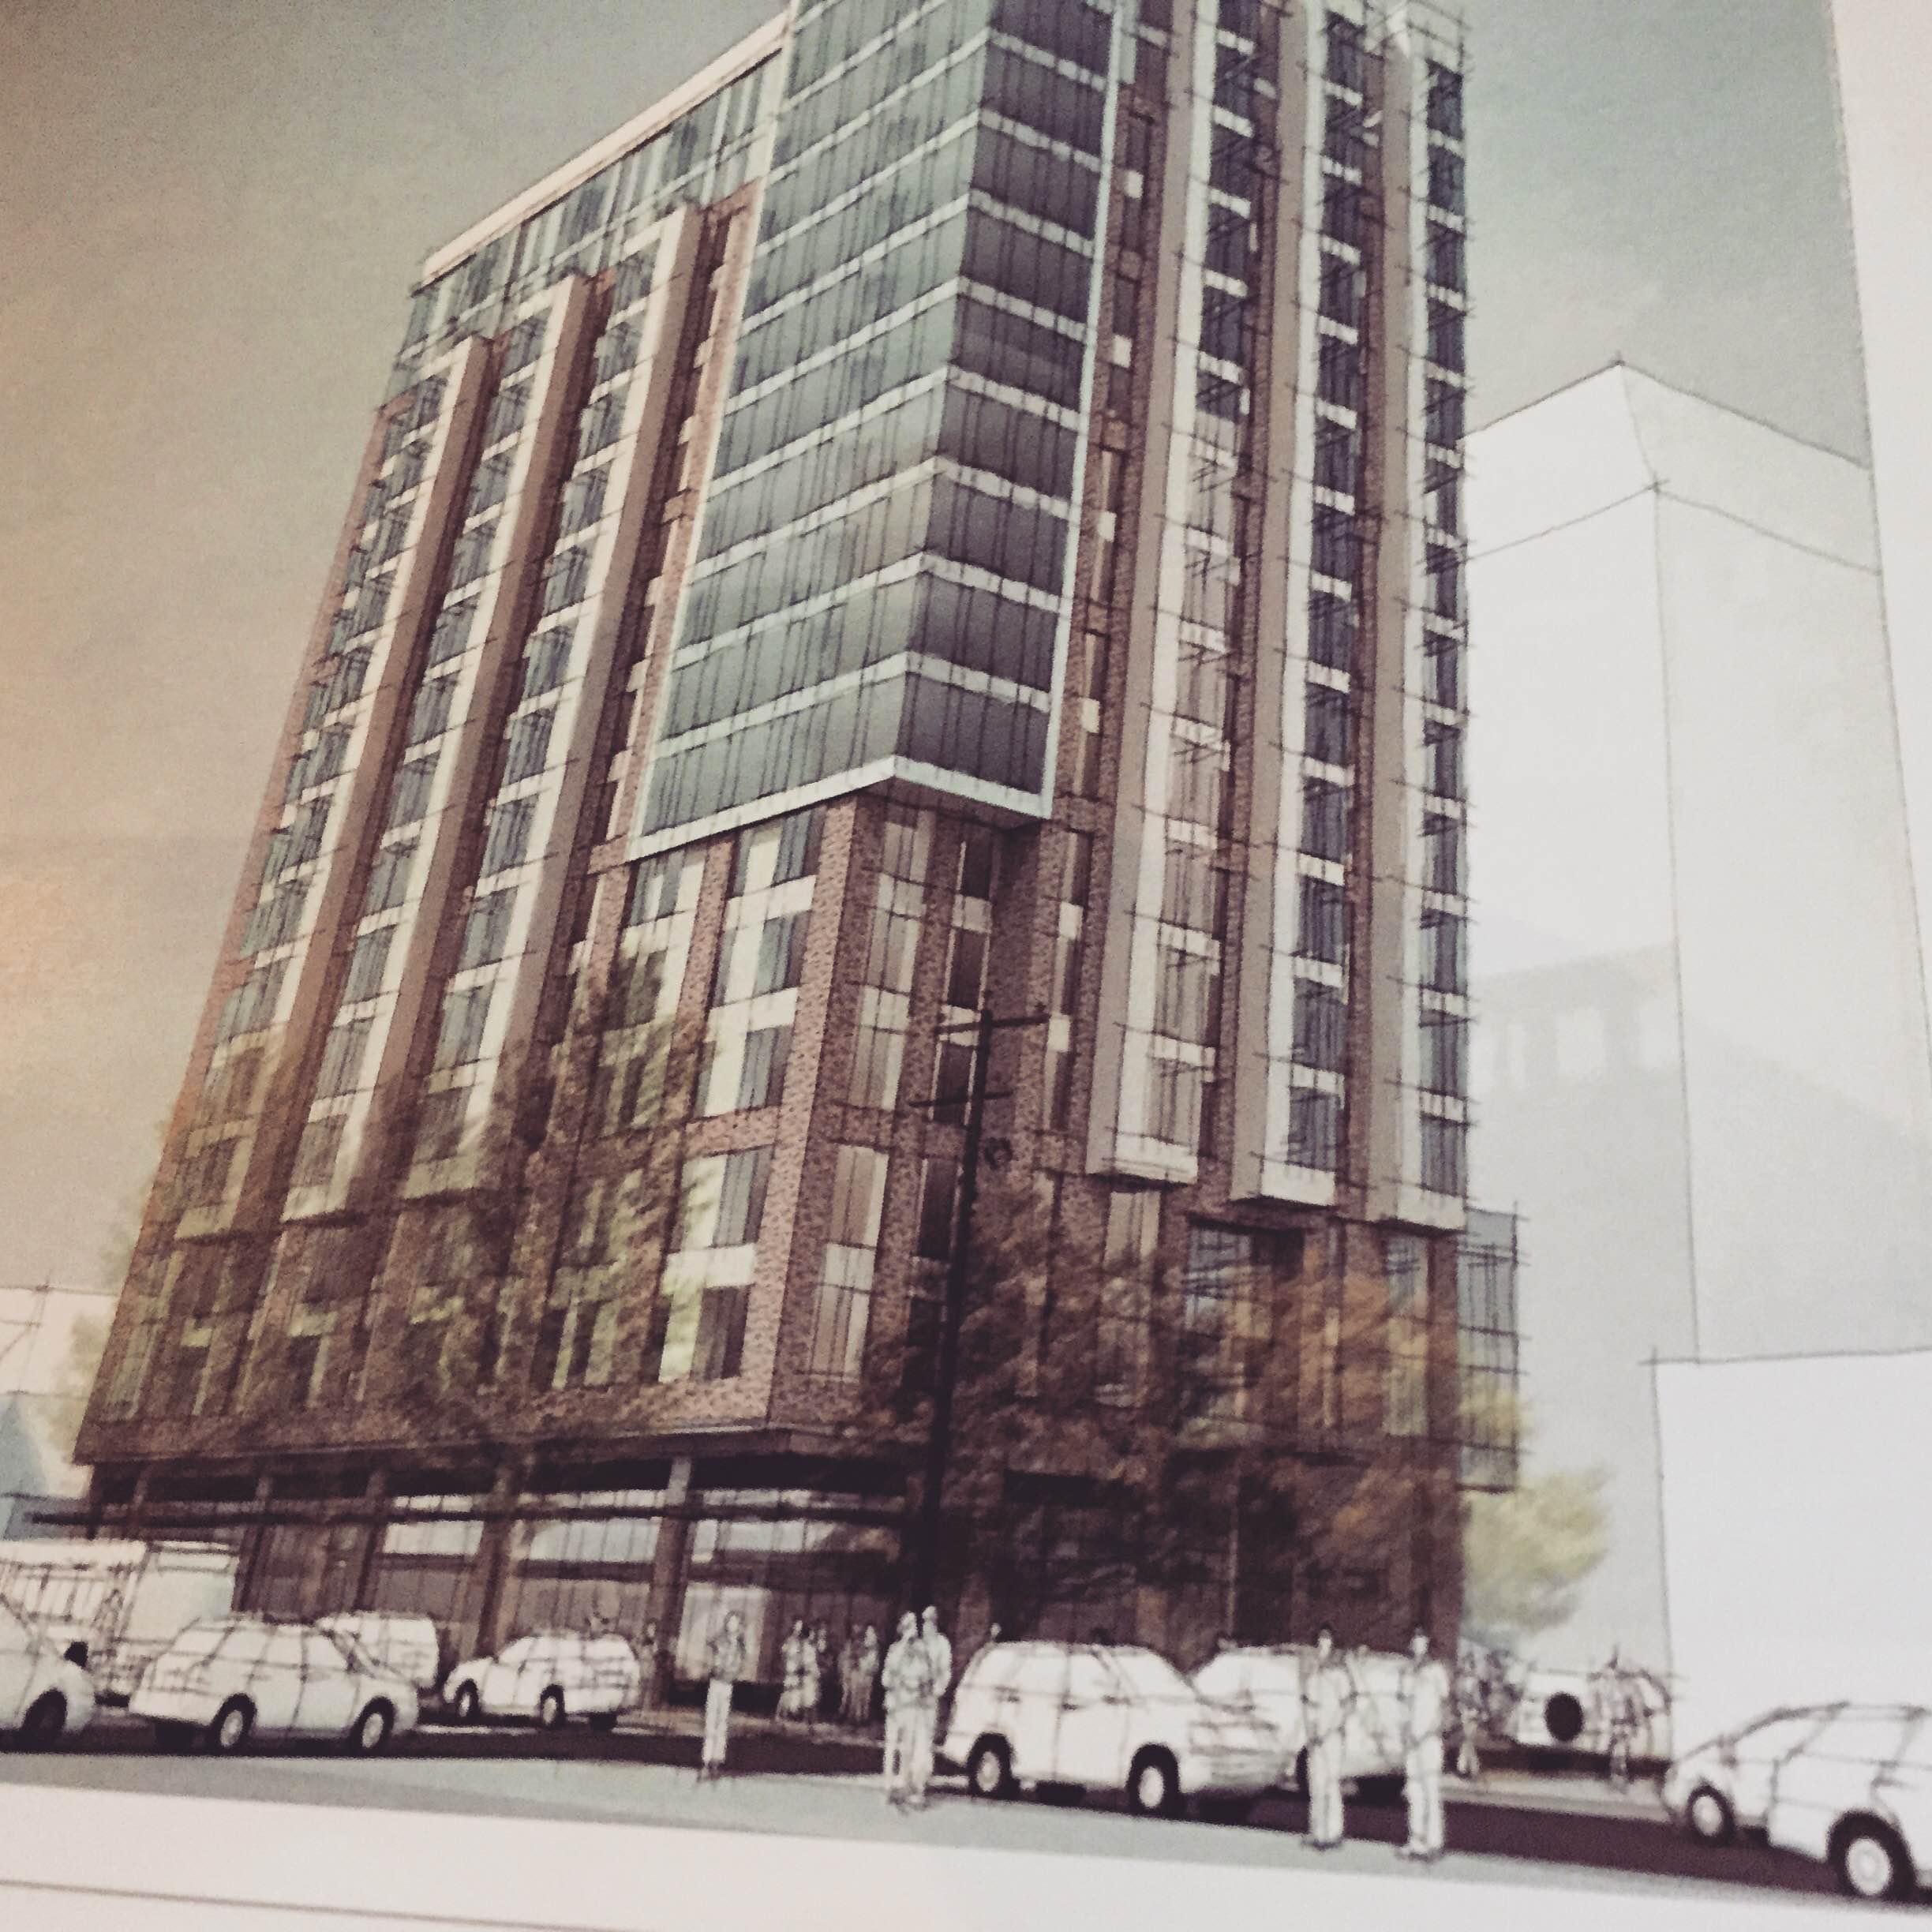 Rendering of 1001 Minor Ave tower, courtesy of DPD.